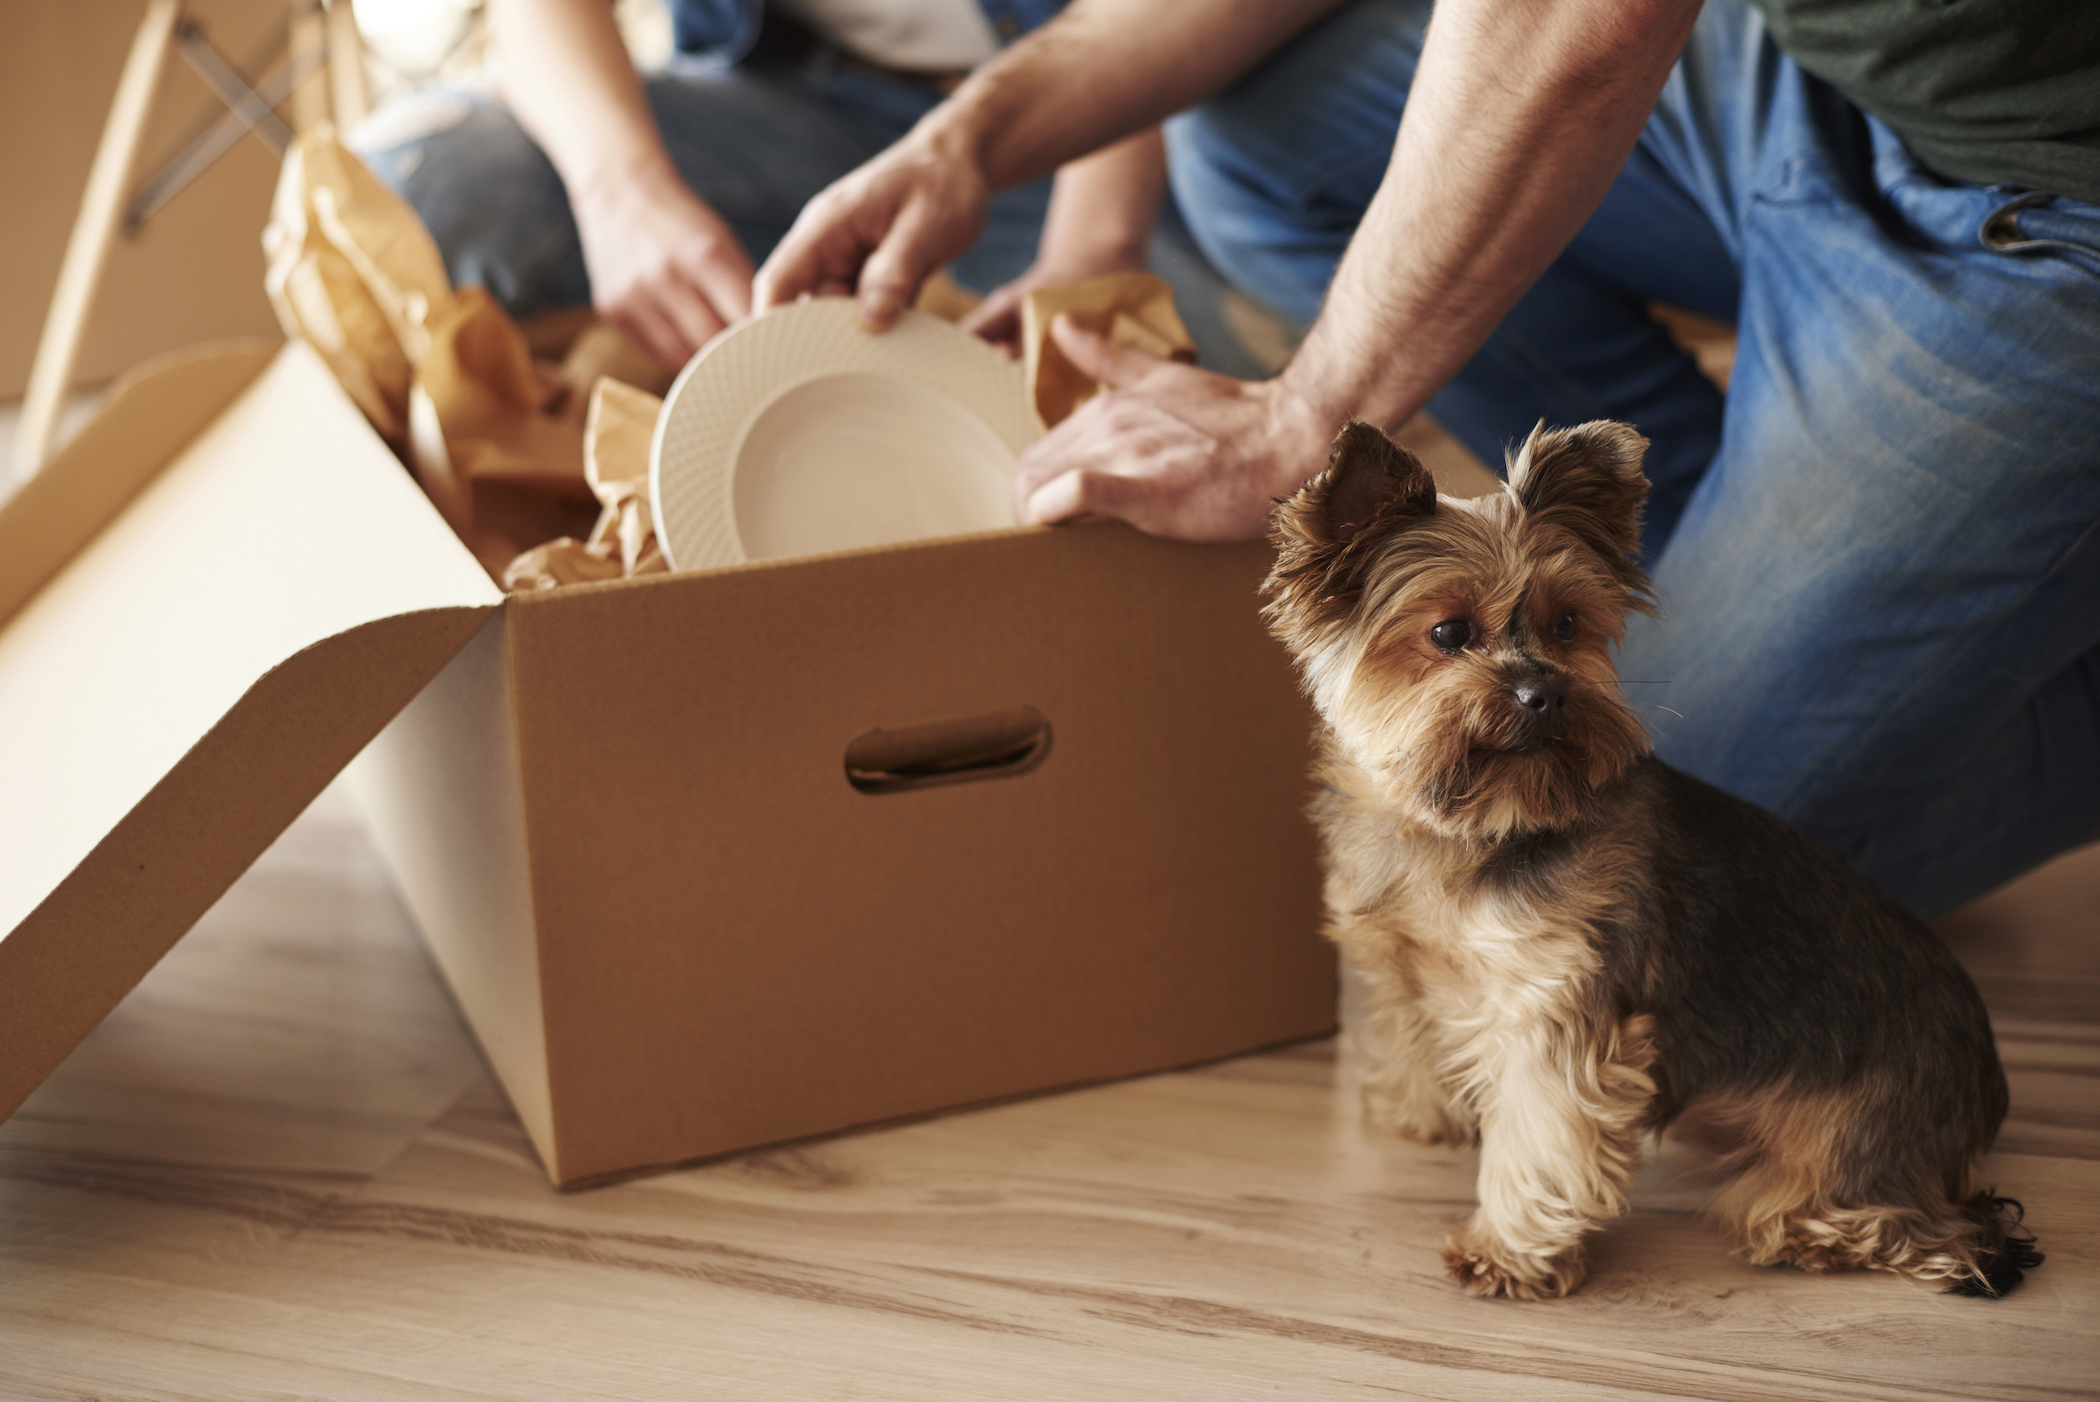 Here's What to Pack First When Moving